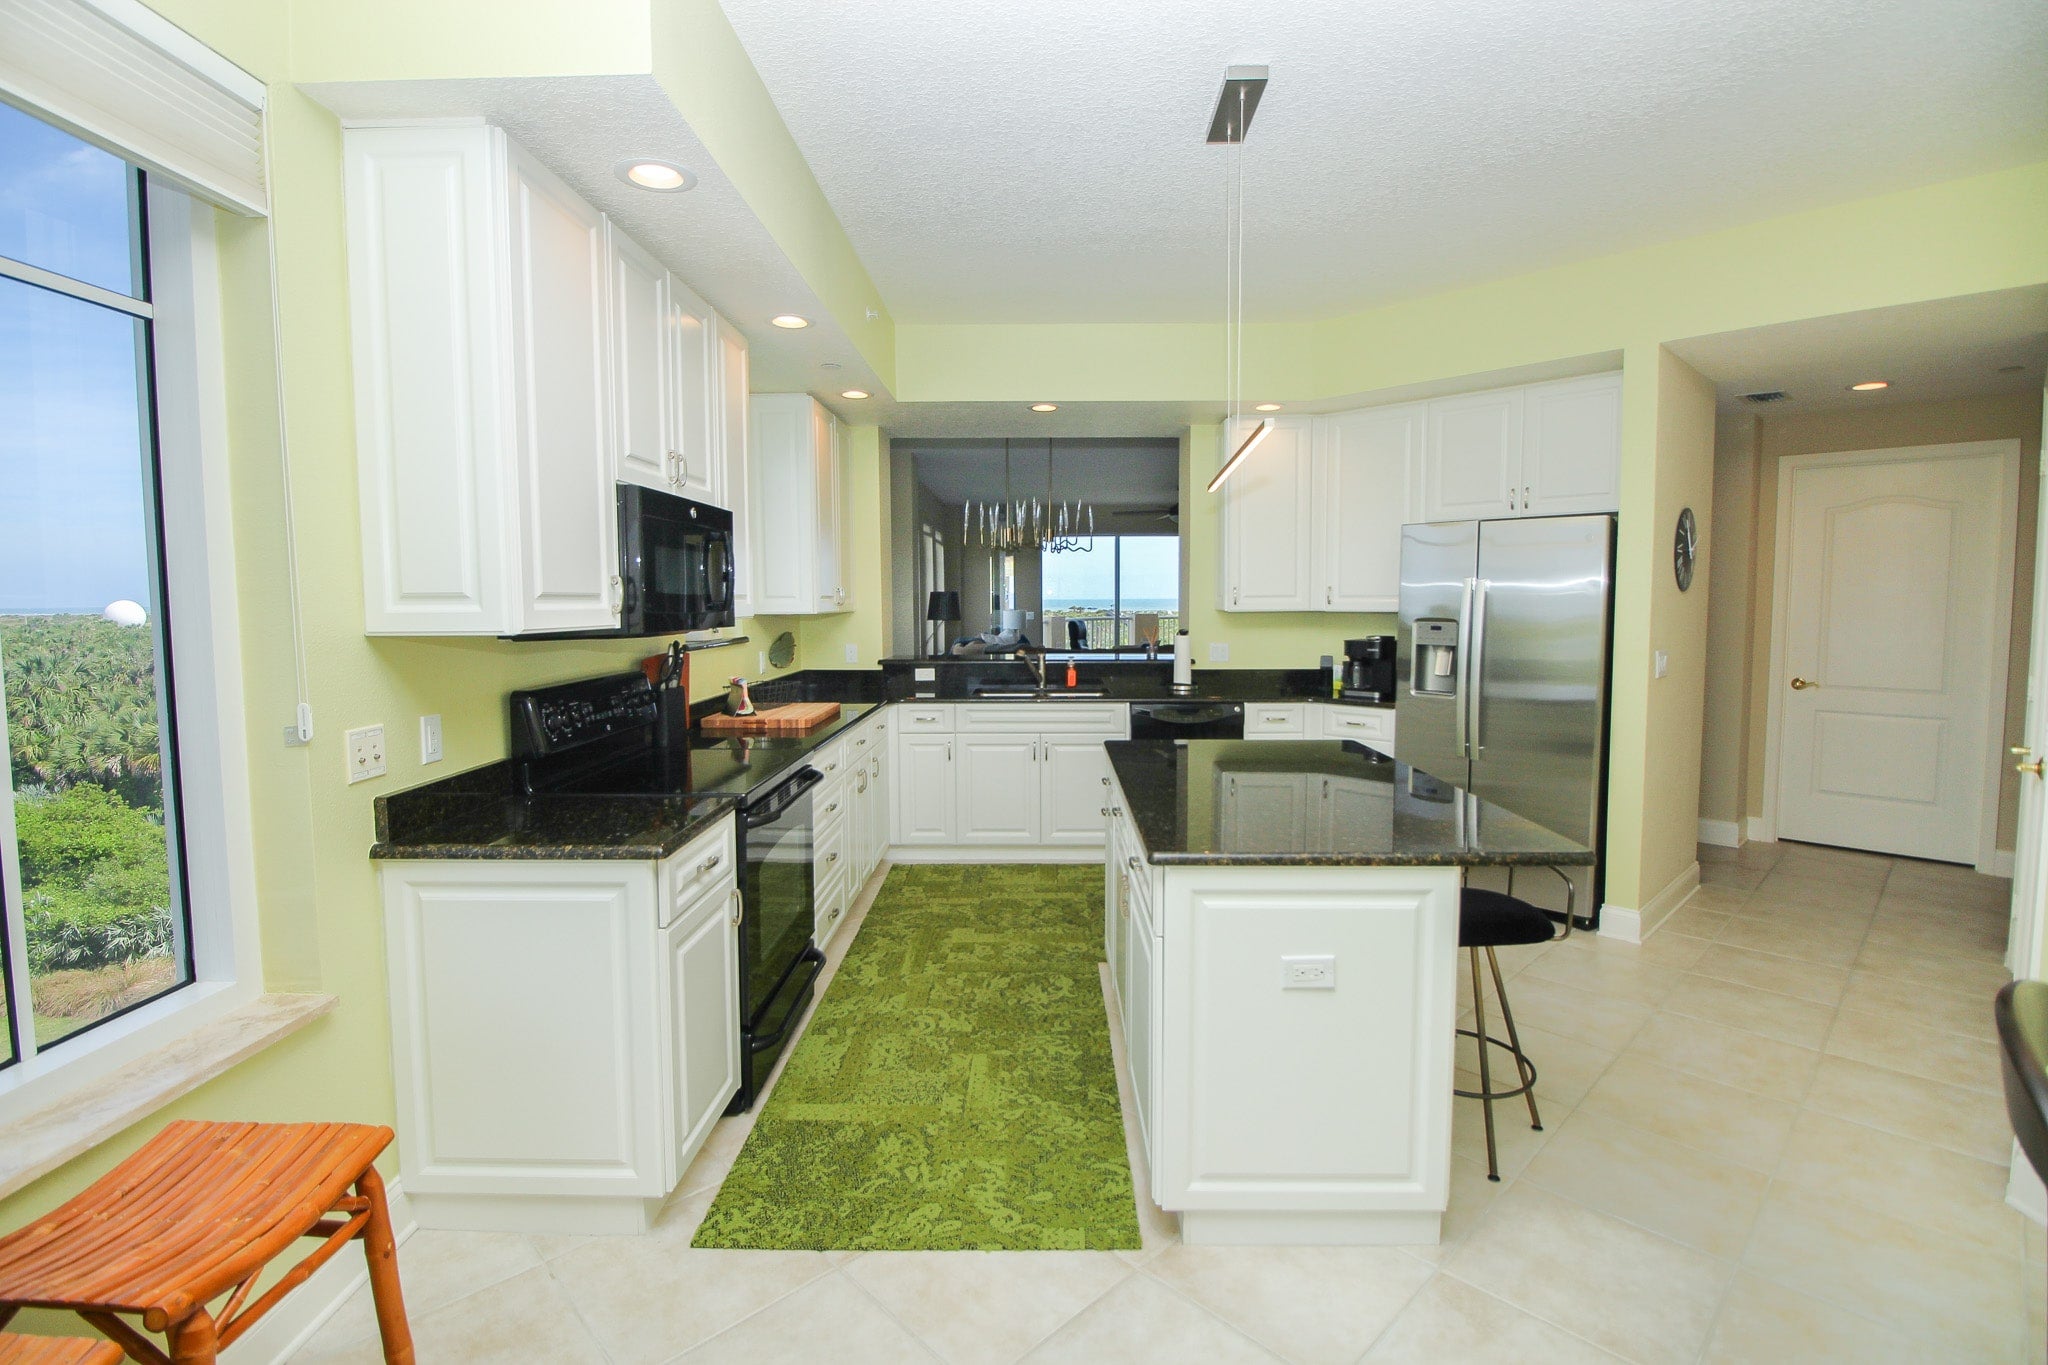 Ample kitchen space